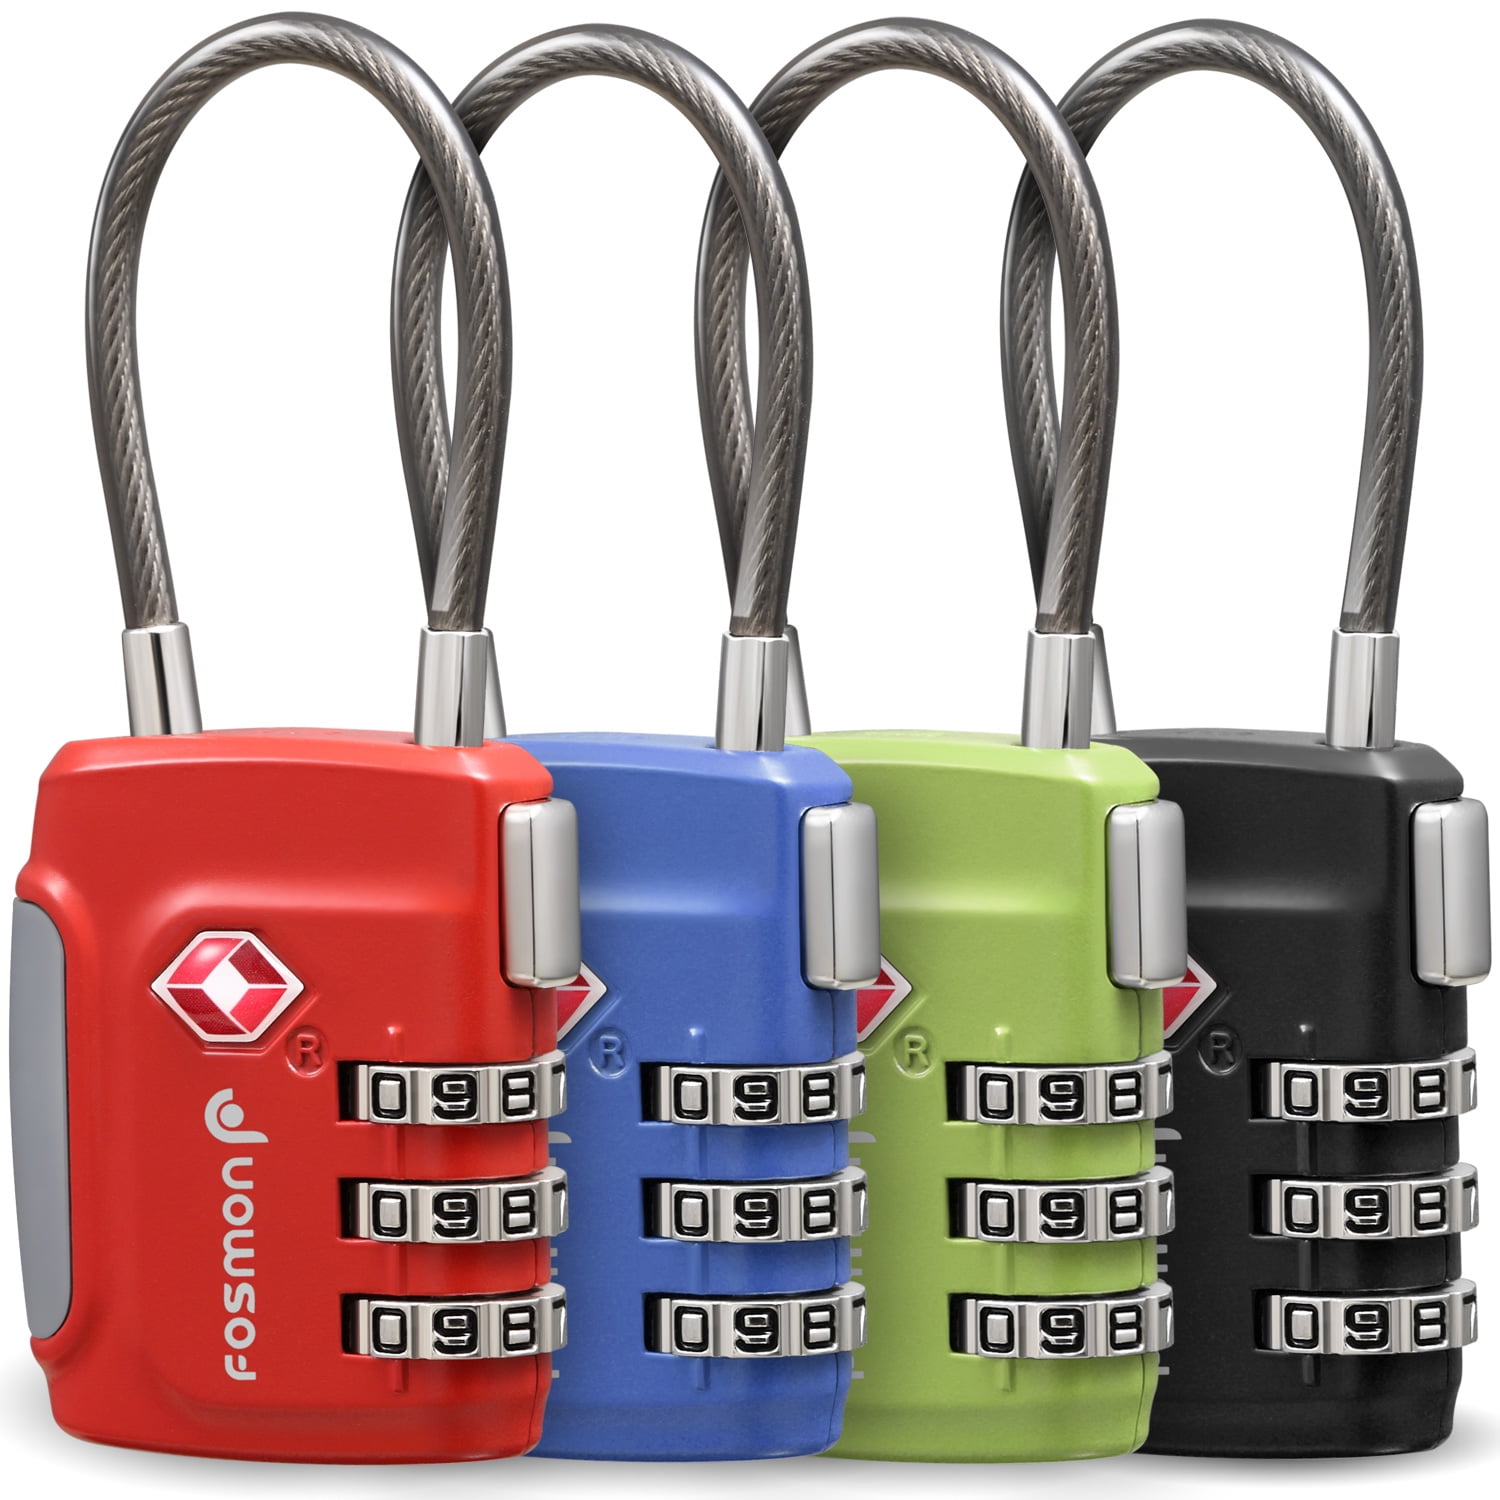 Blue TSA Approved Travel Combination Cable Luggage Locks for Suitcases-4 Pack